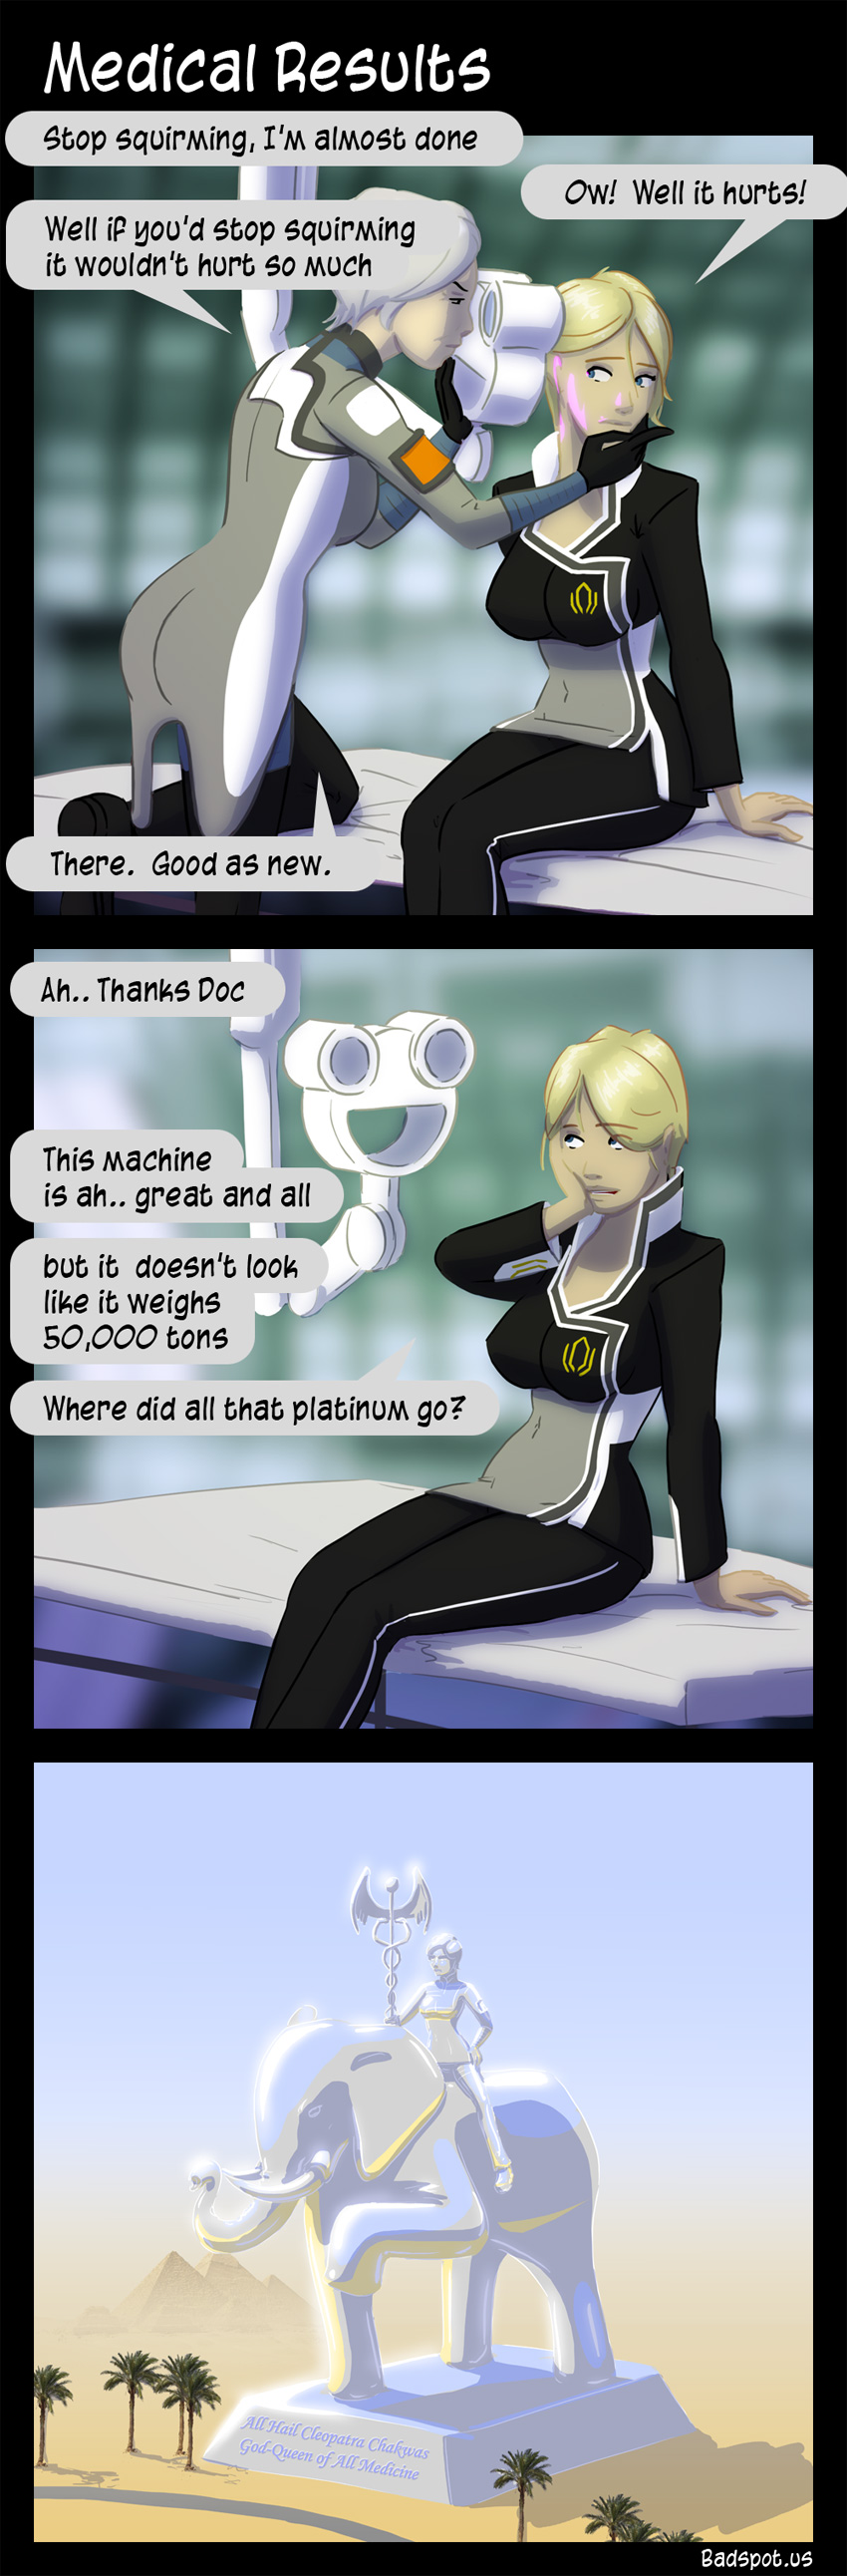 Funny Pictures go here - Page 16 Mass-Effect-Comic-Medical-Results